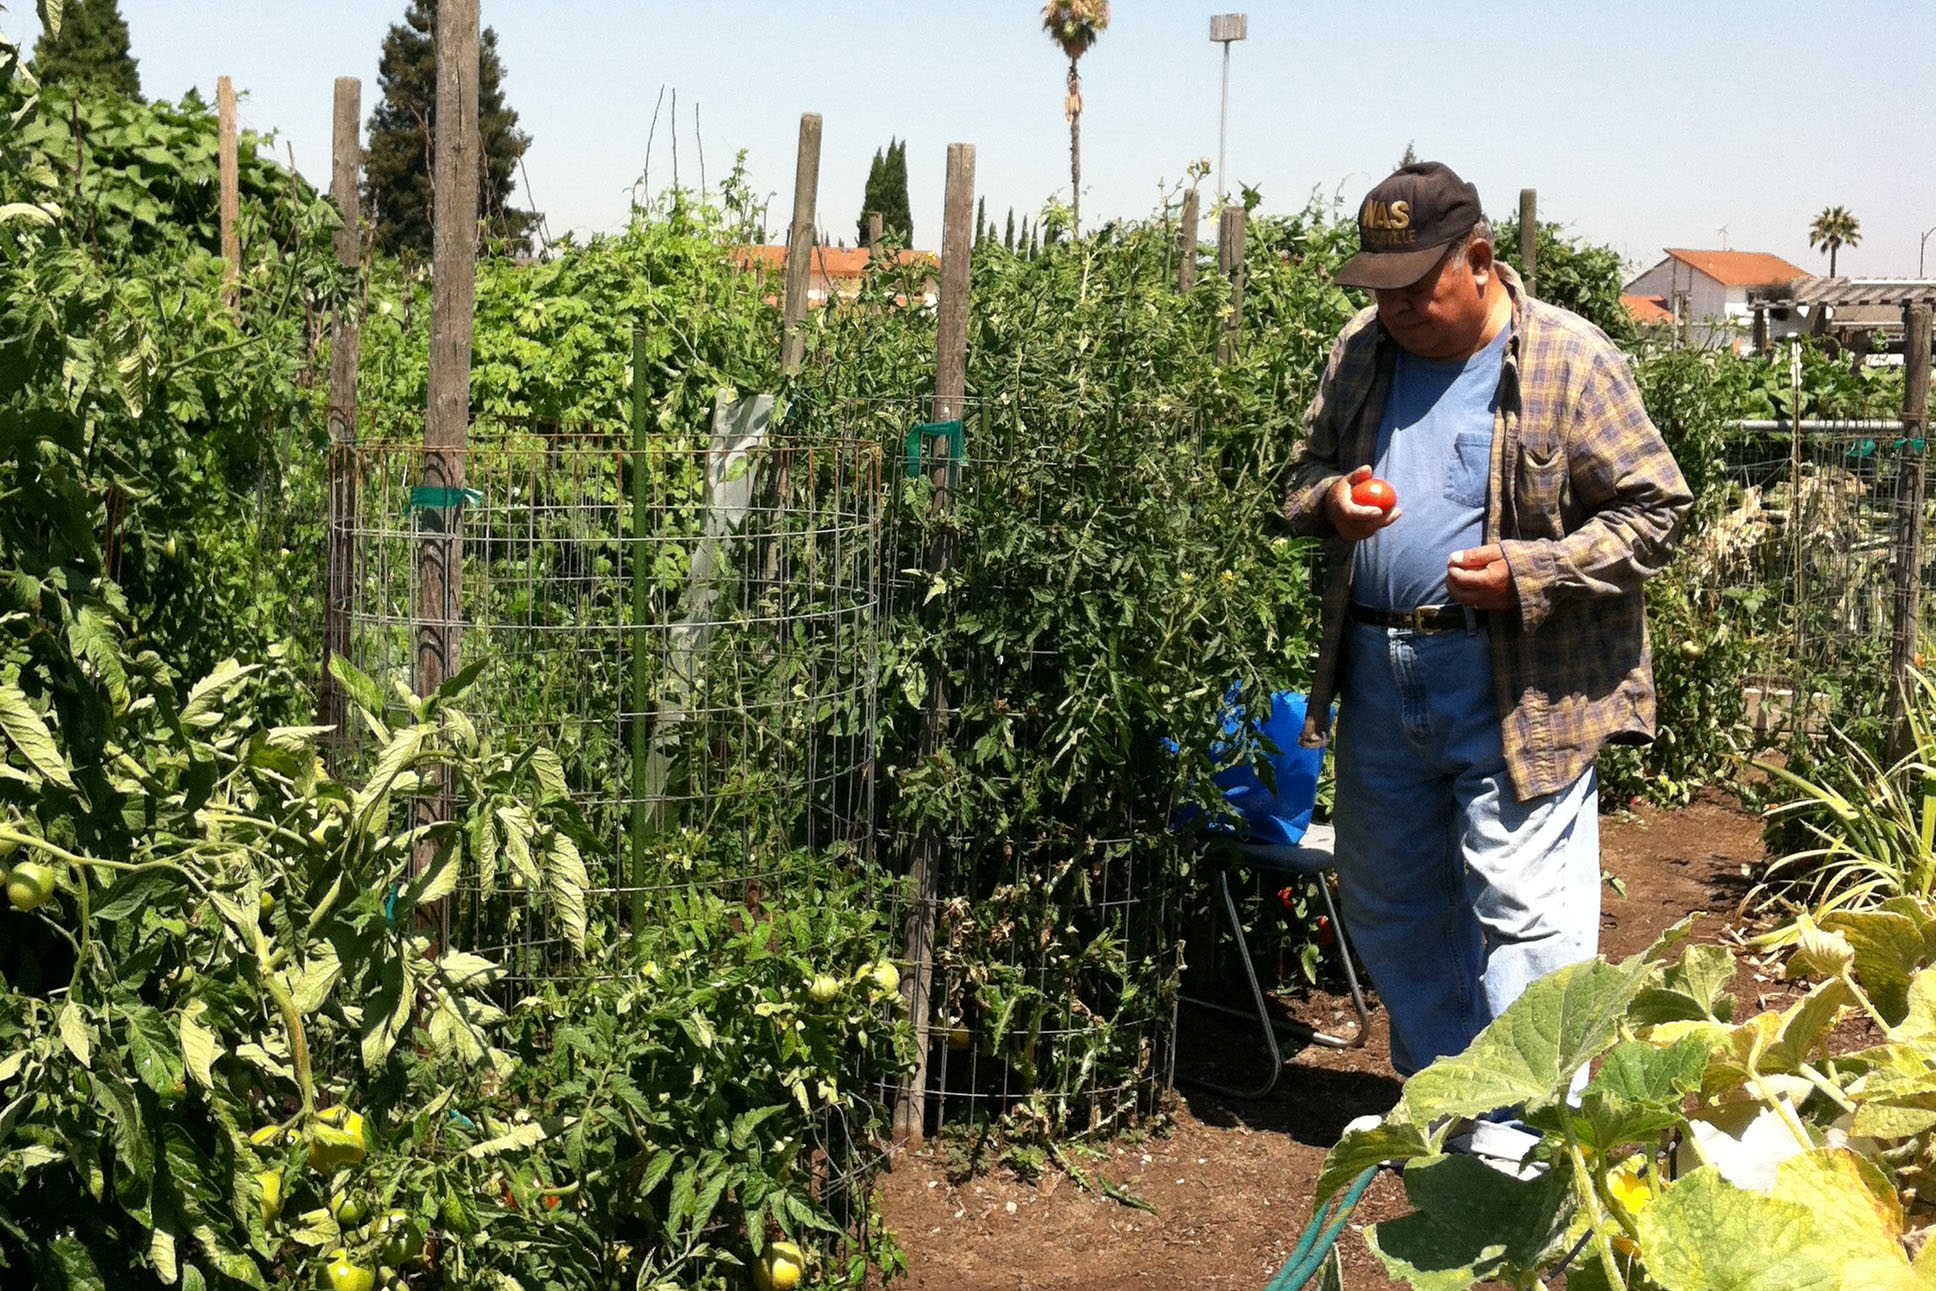 Growing Efforts to Protect Agriculture in the Santa Clara Valley